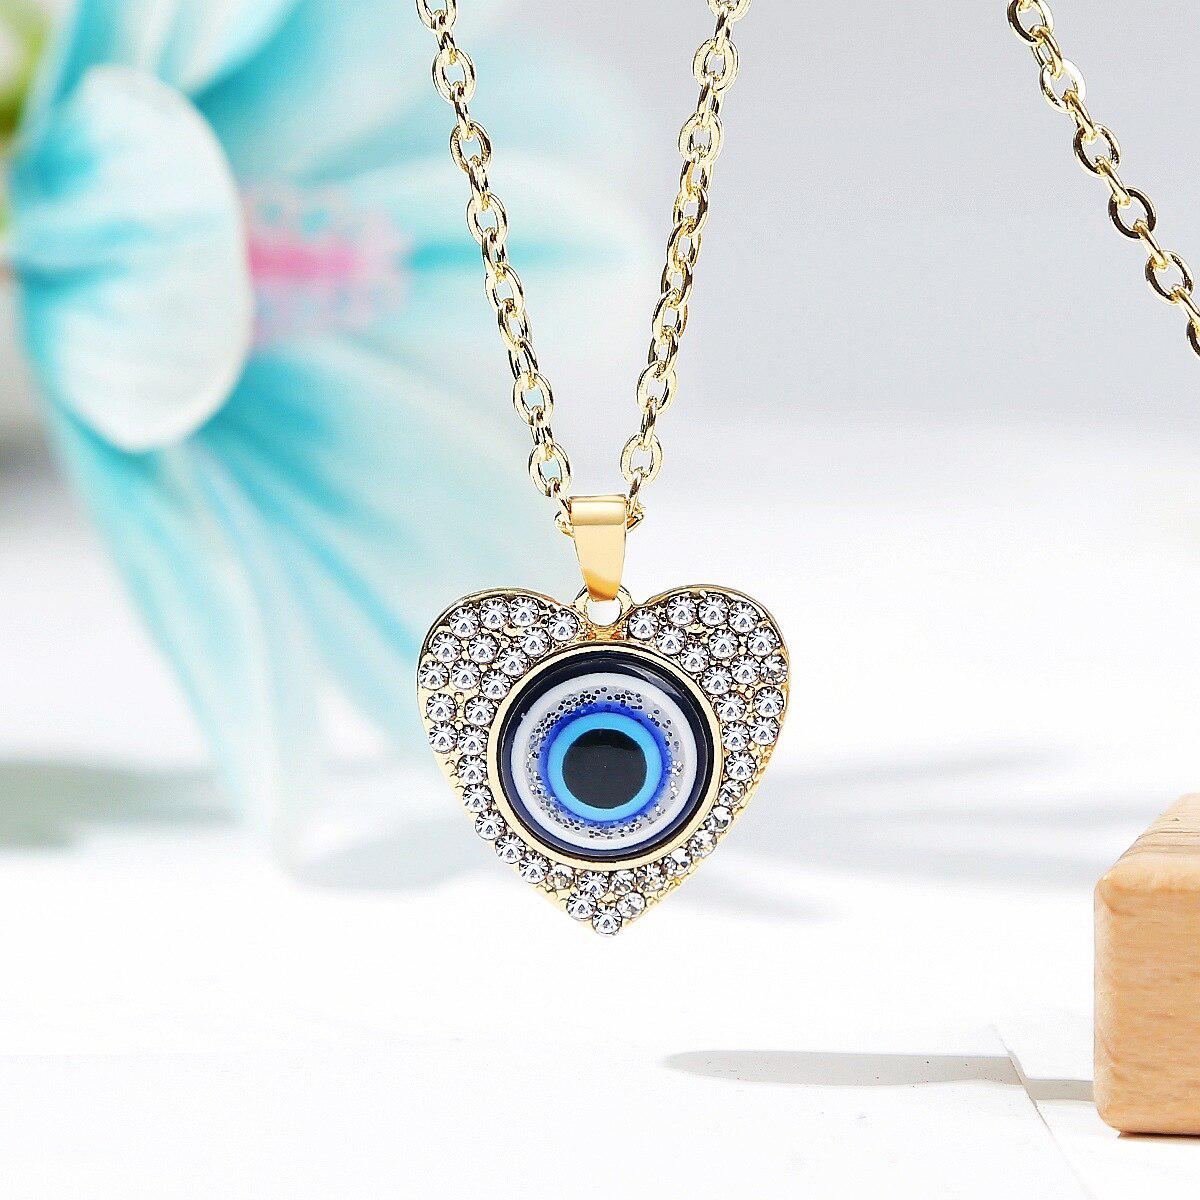 Evil Eye Heart Necklace with Cubic Zirconia-Evil Eye Necklace-Auswara